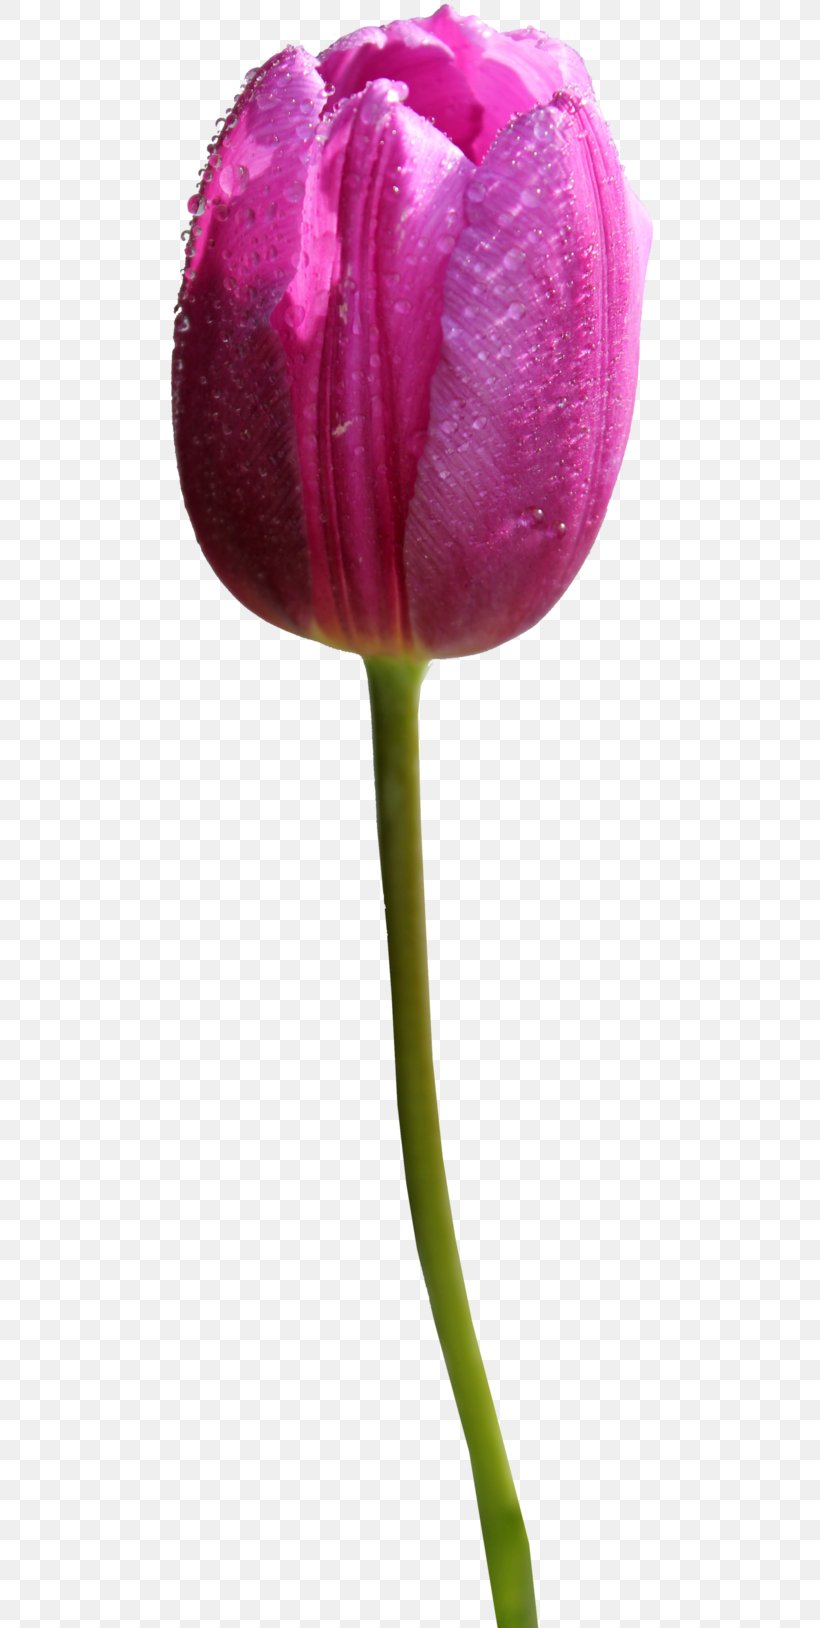 Skagit Valley Tulip Festival Clip Art, PNG, 490x1628px, Skagit Valley Tulip Festival, Bud, Close Up, Cut Flowers, Flower Download Free